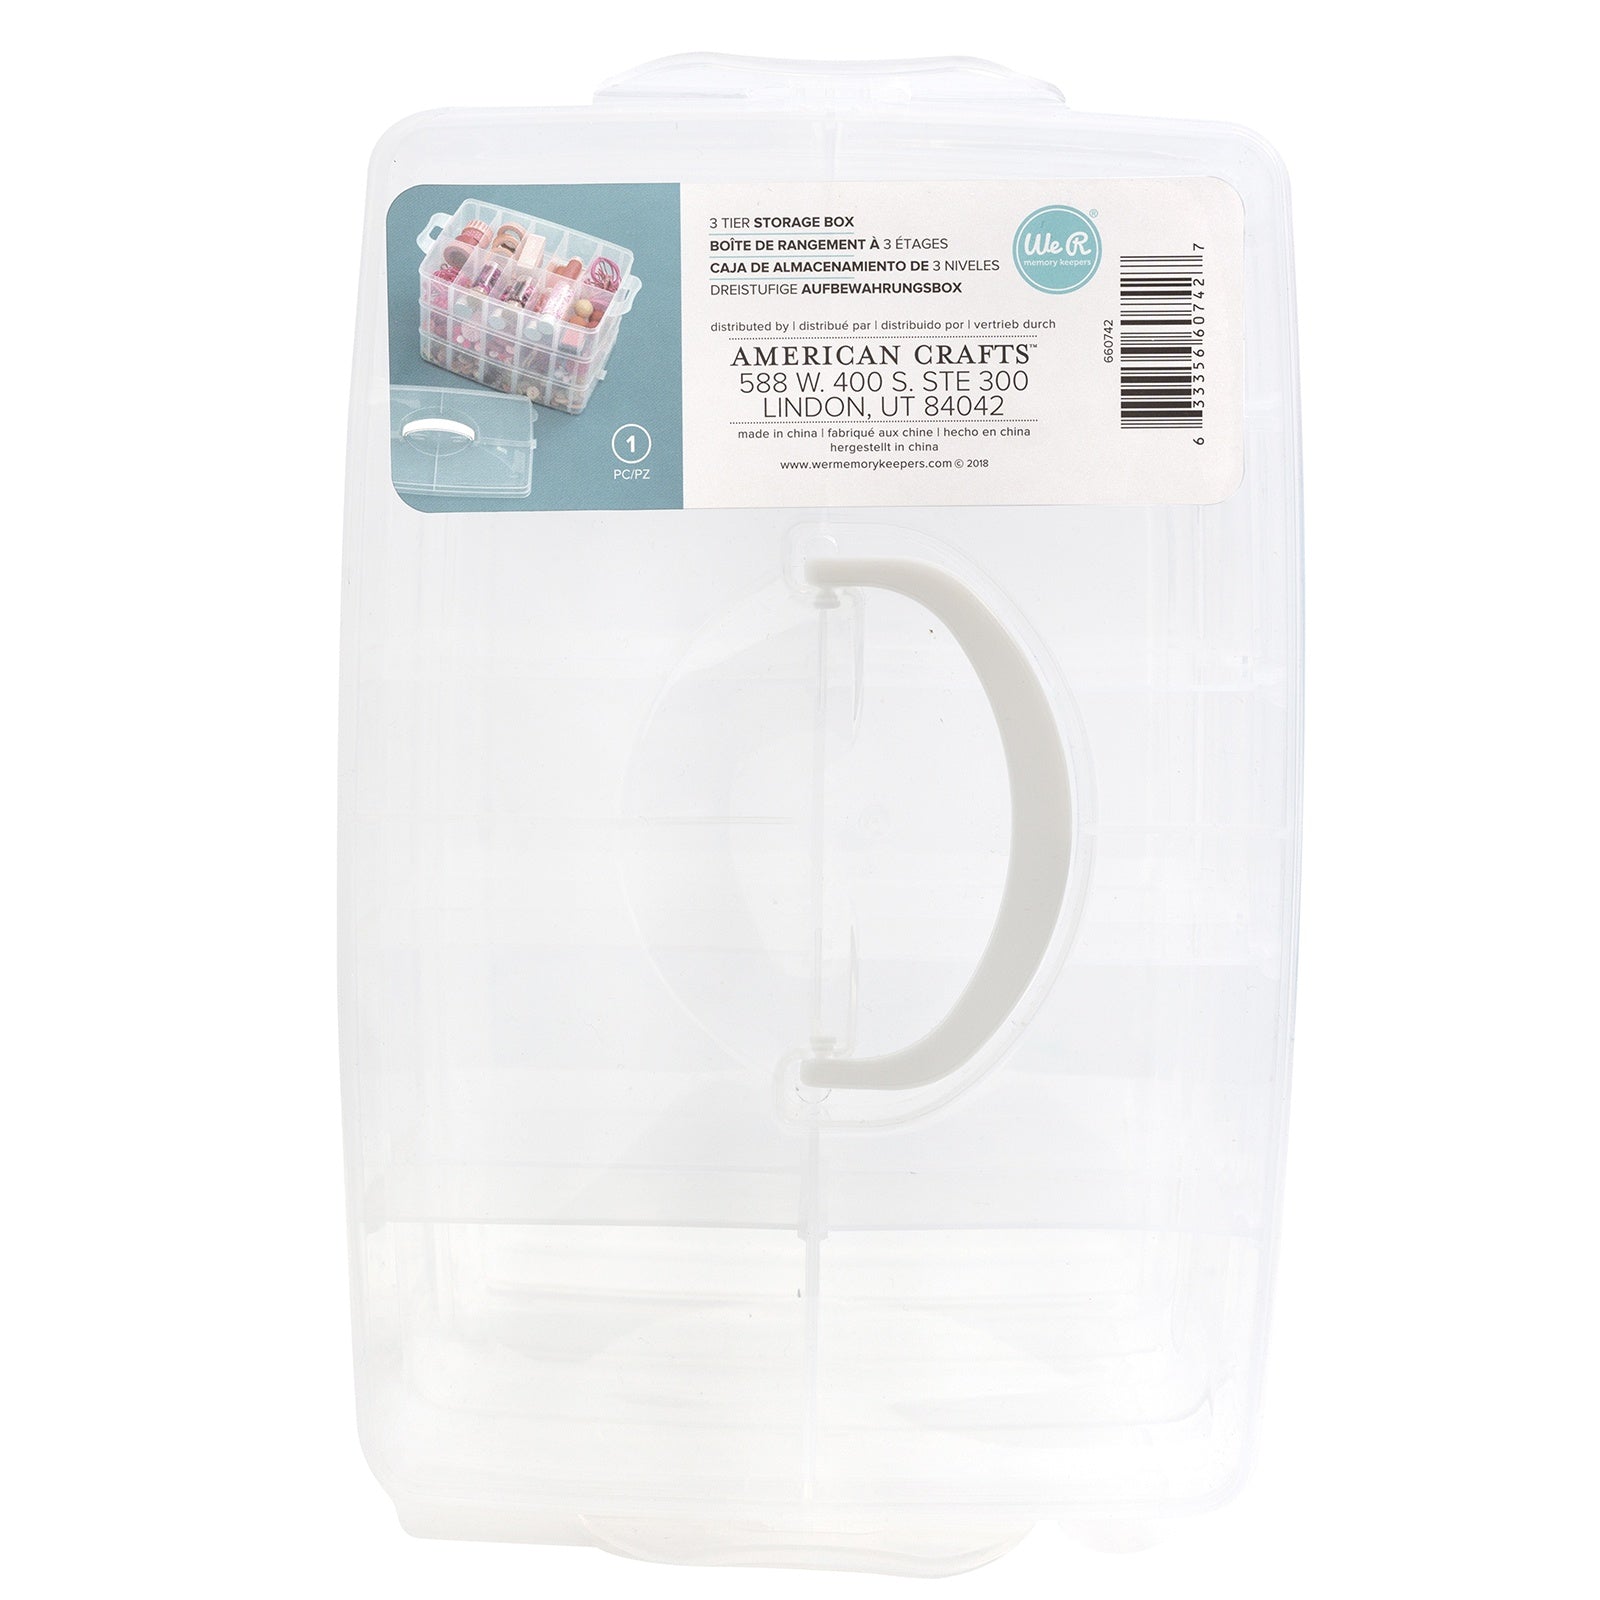 We R Memory Keepers® Clear Craft & Photo Plastic Storage Case